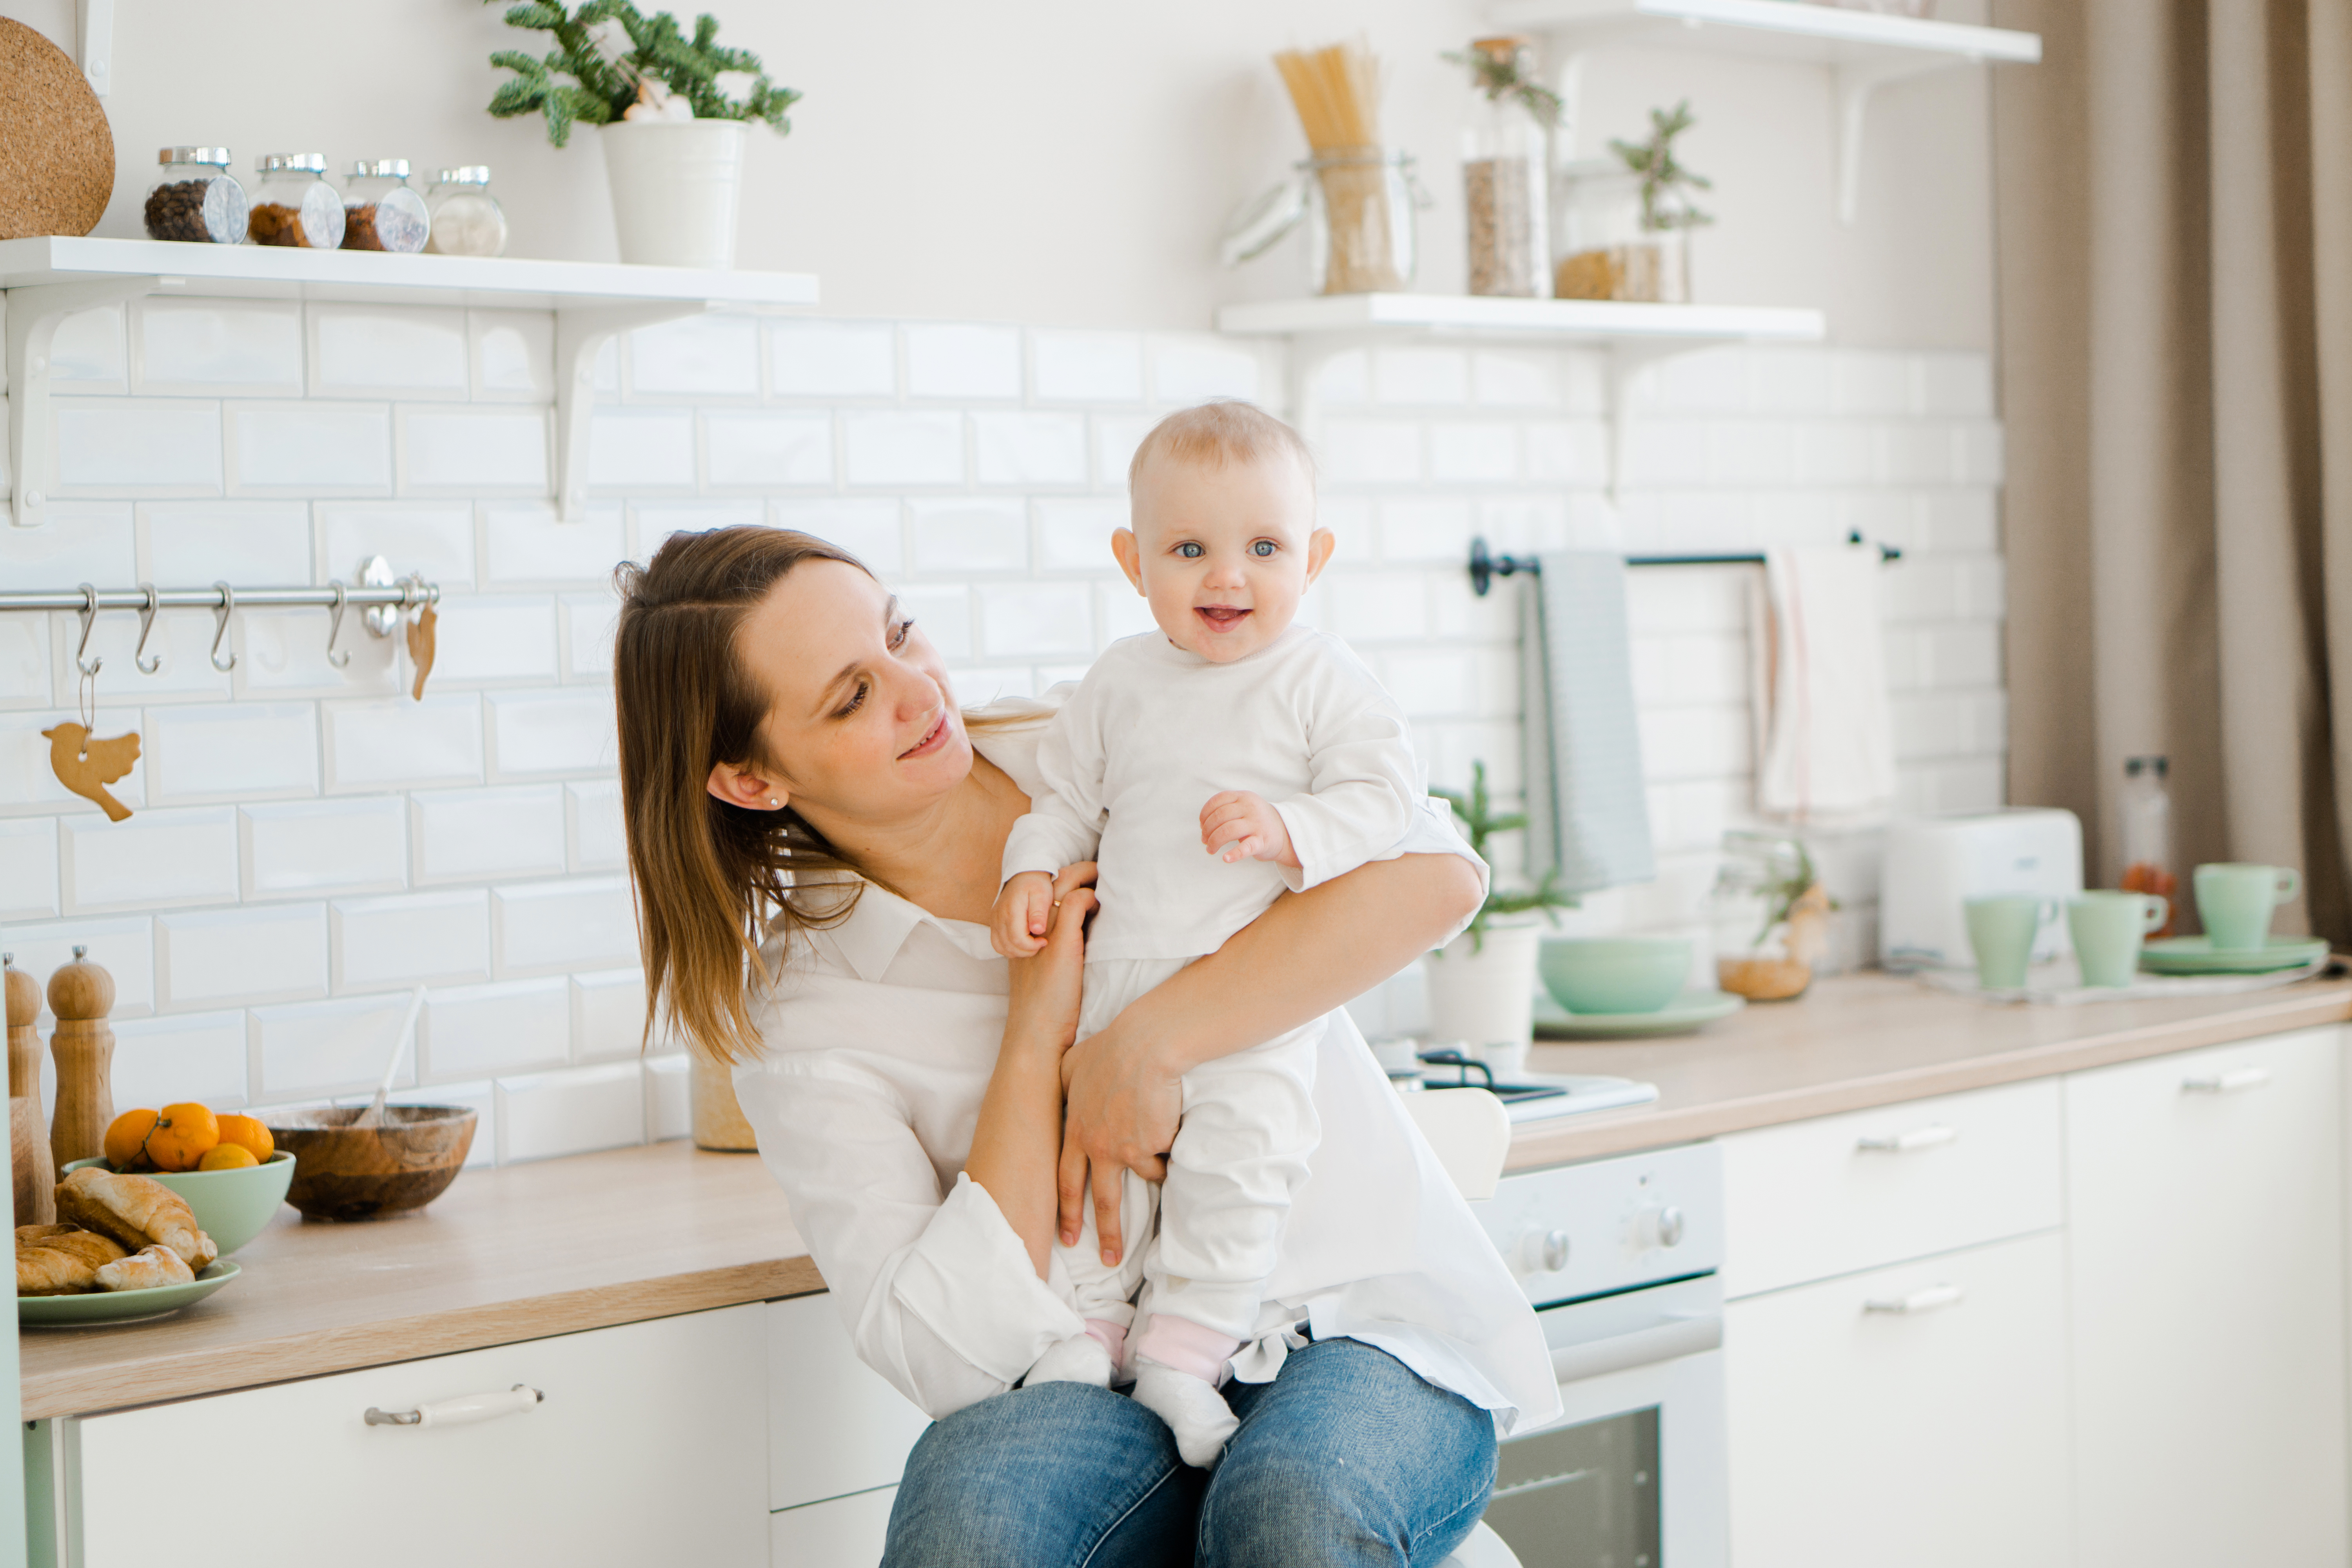 Essential Items for Each New Baby - Love to be in the Kitchen